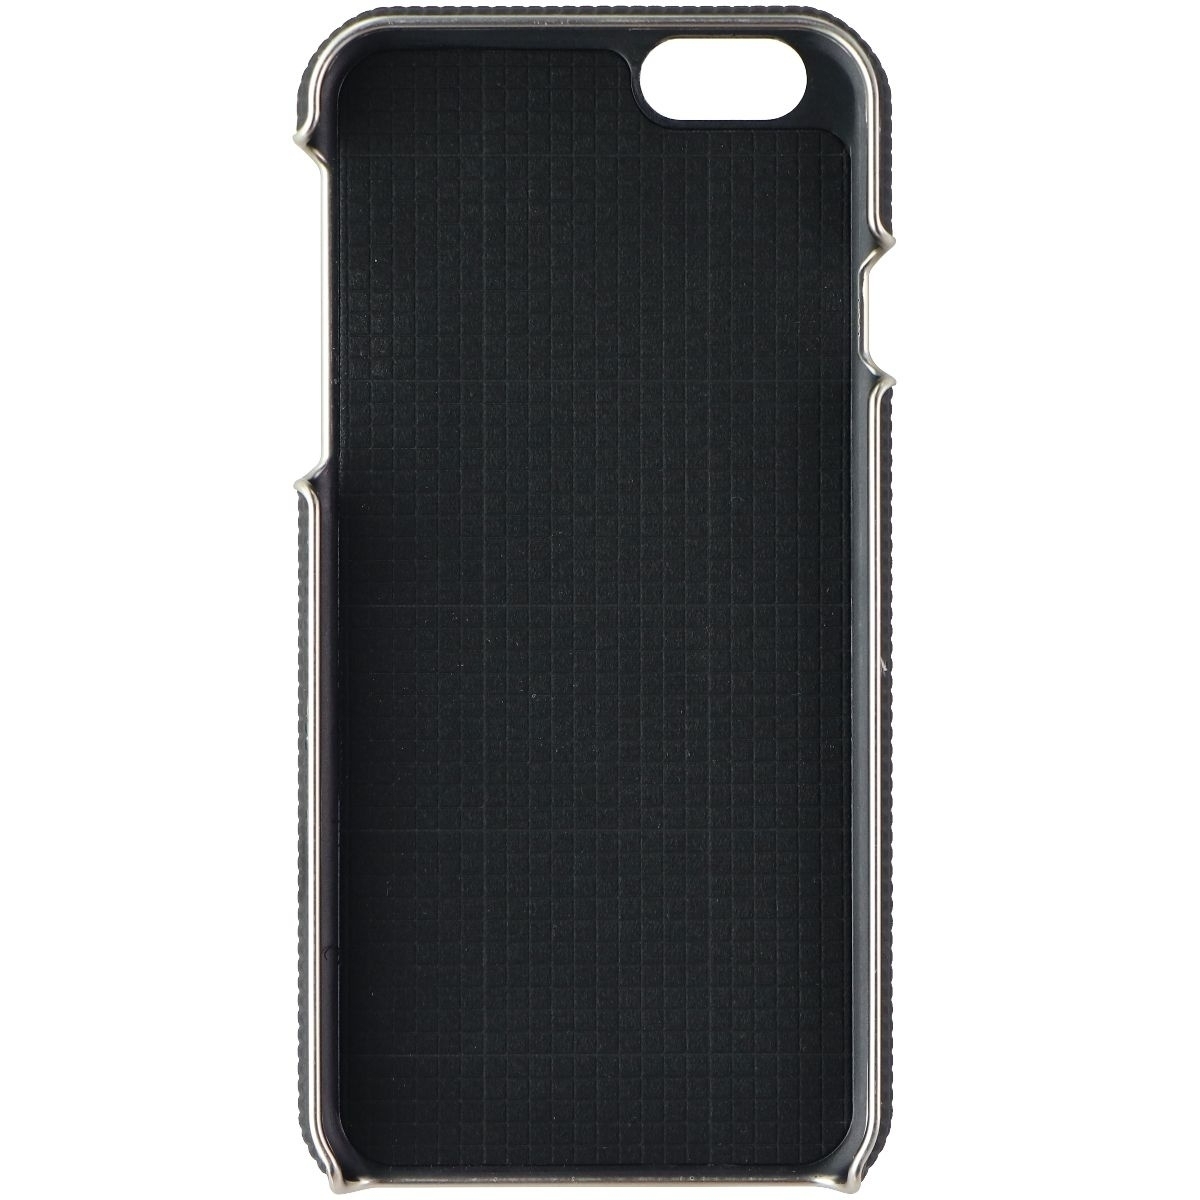 Jack Spade Wrap Series Hard Case For Apple IPhone 6s / 6 - Black/Silver